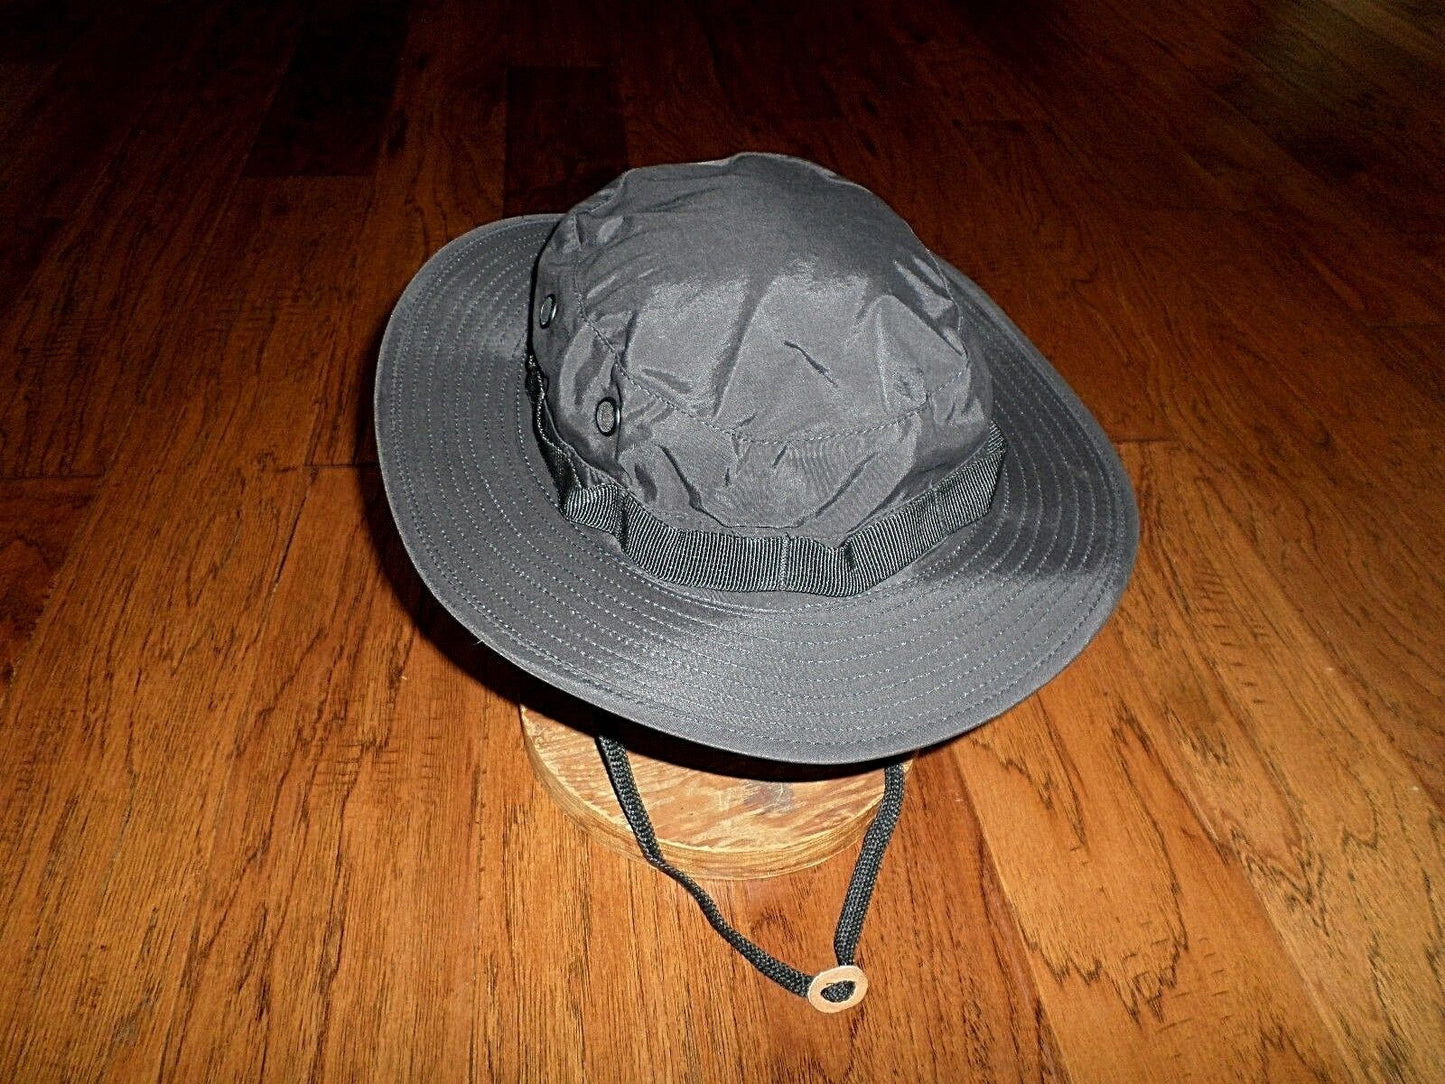 NEW BLACK TRILAM BOONIE HAT WET WEATHER HAT SIZE X- LARGE TRILAM NYLON